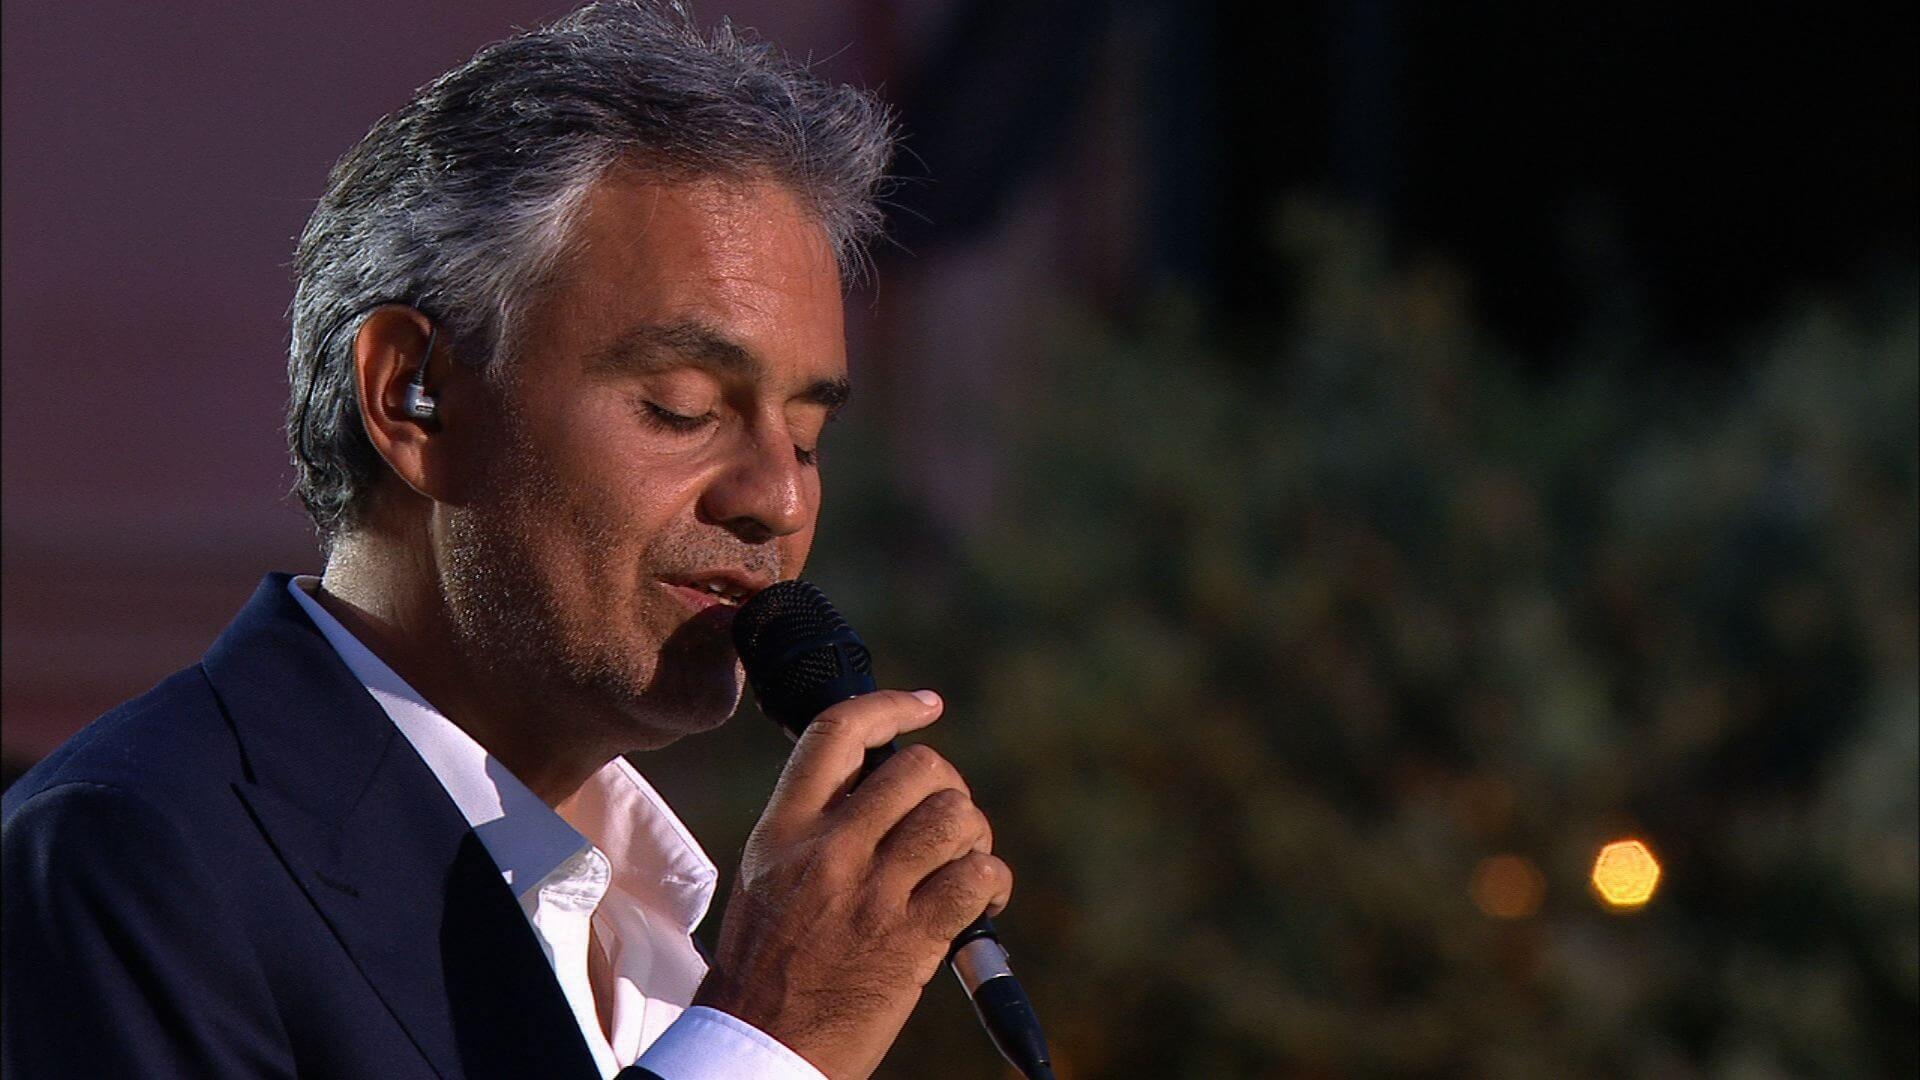 Andrea Bocelli, 5-day stage fright solution, Music, 1920x1080 Full HD Desktop